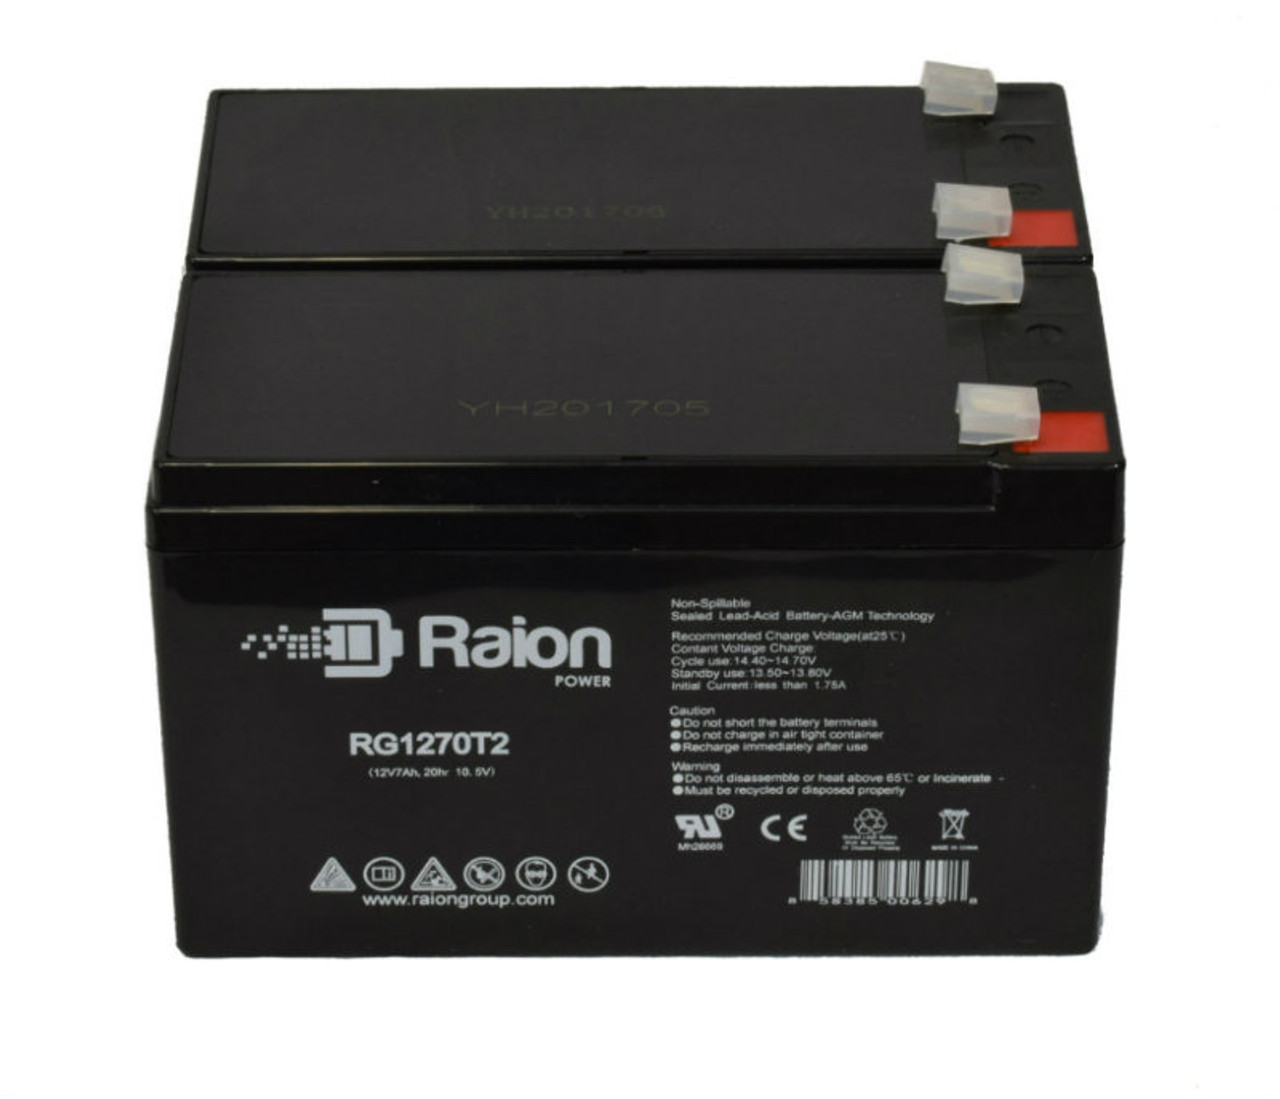 Raion Power Replacement 12V 7Ah Battery for Ultra Products 1000 VA AVR Lawn Mower - 2 Pack